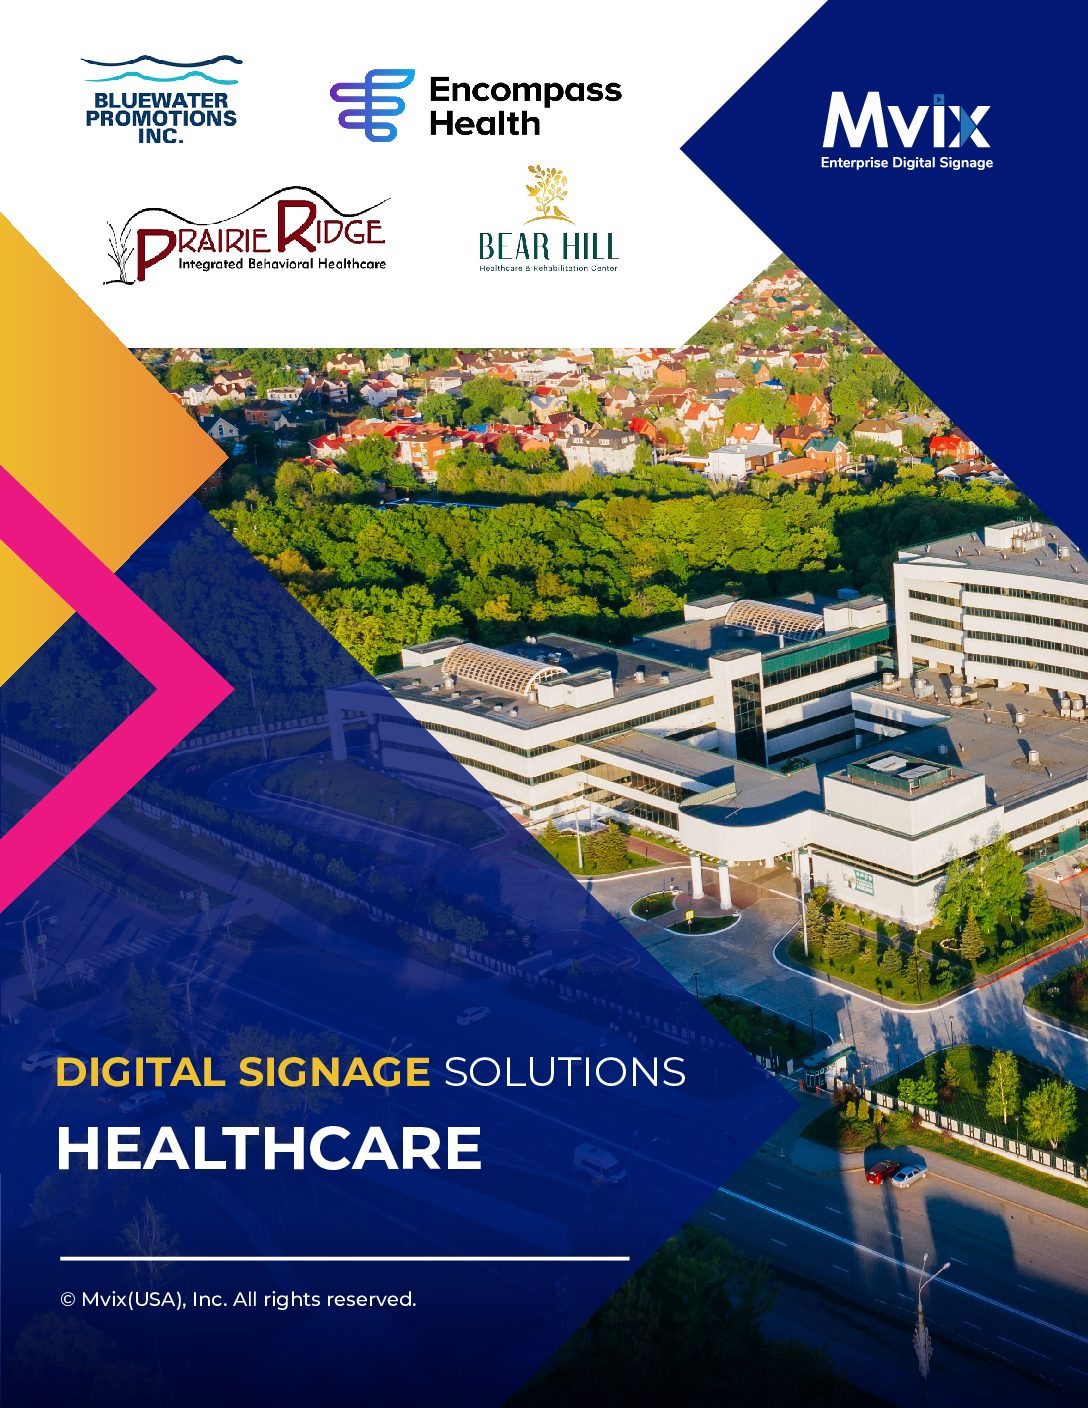 Digital Signage Solutions for Healthcare